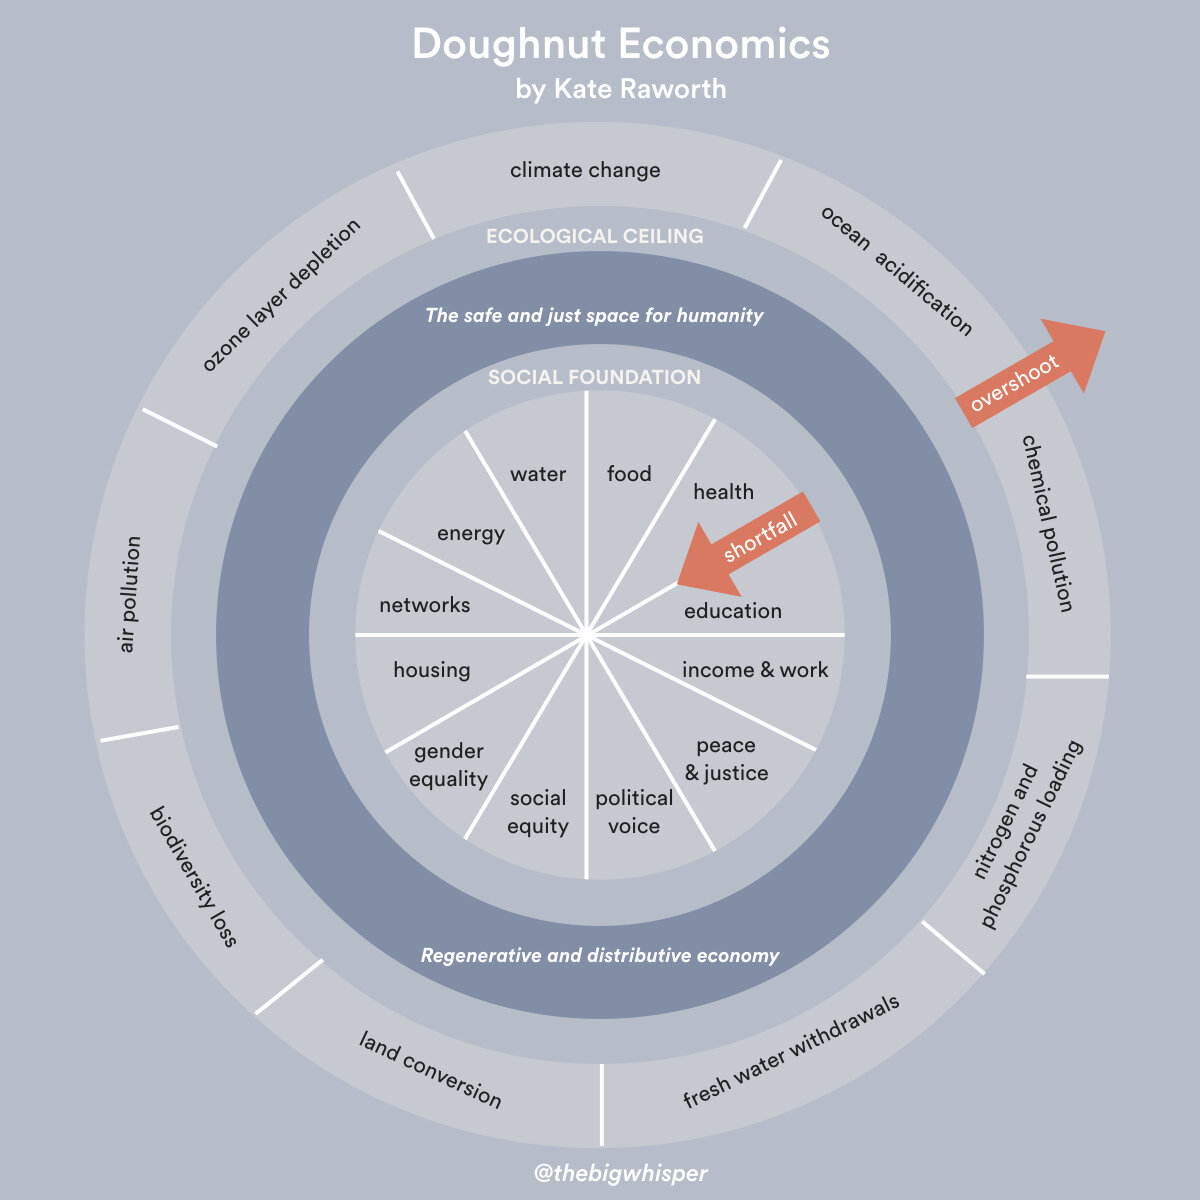 Introduction to Doughnut Economics and questions to consider to apply this framework to endeavor — The Big Whisper